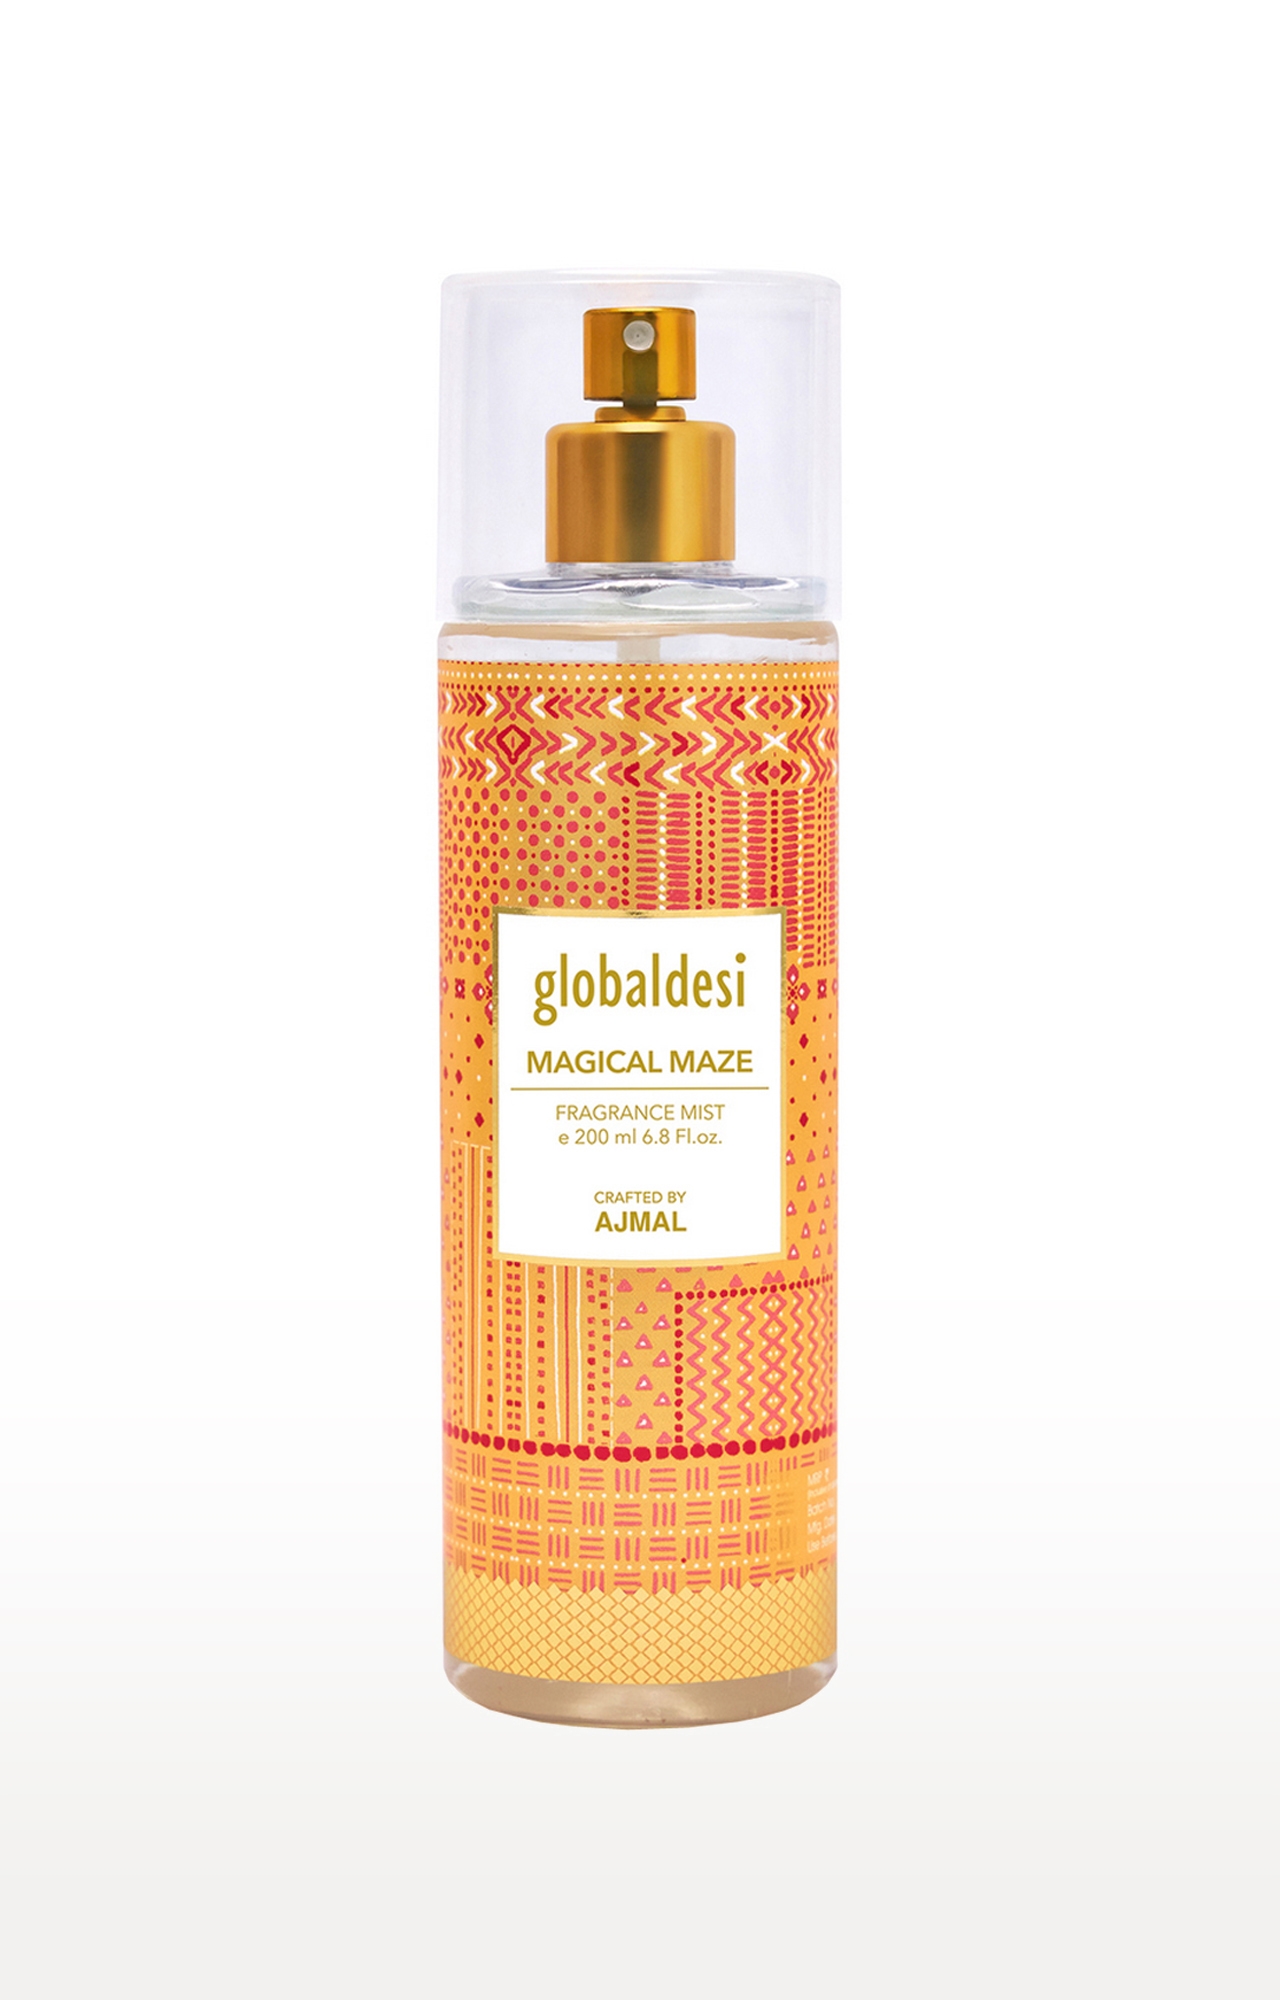 Global Desi Crafted By Ajmal | Global Desi Magical Maze Body Mist 200ML for Women Crafted by Ajmal 